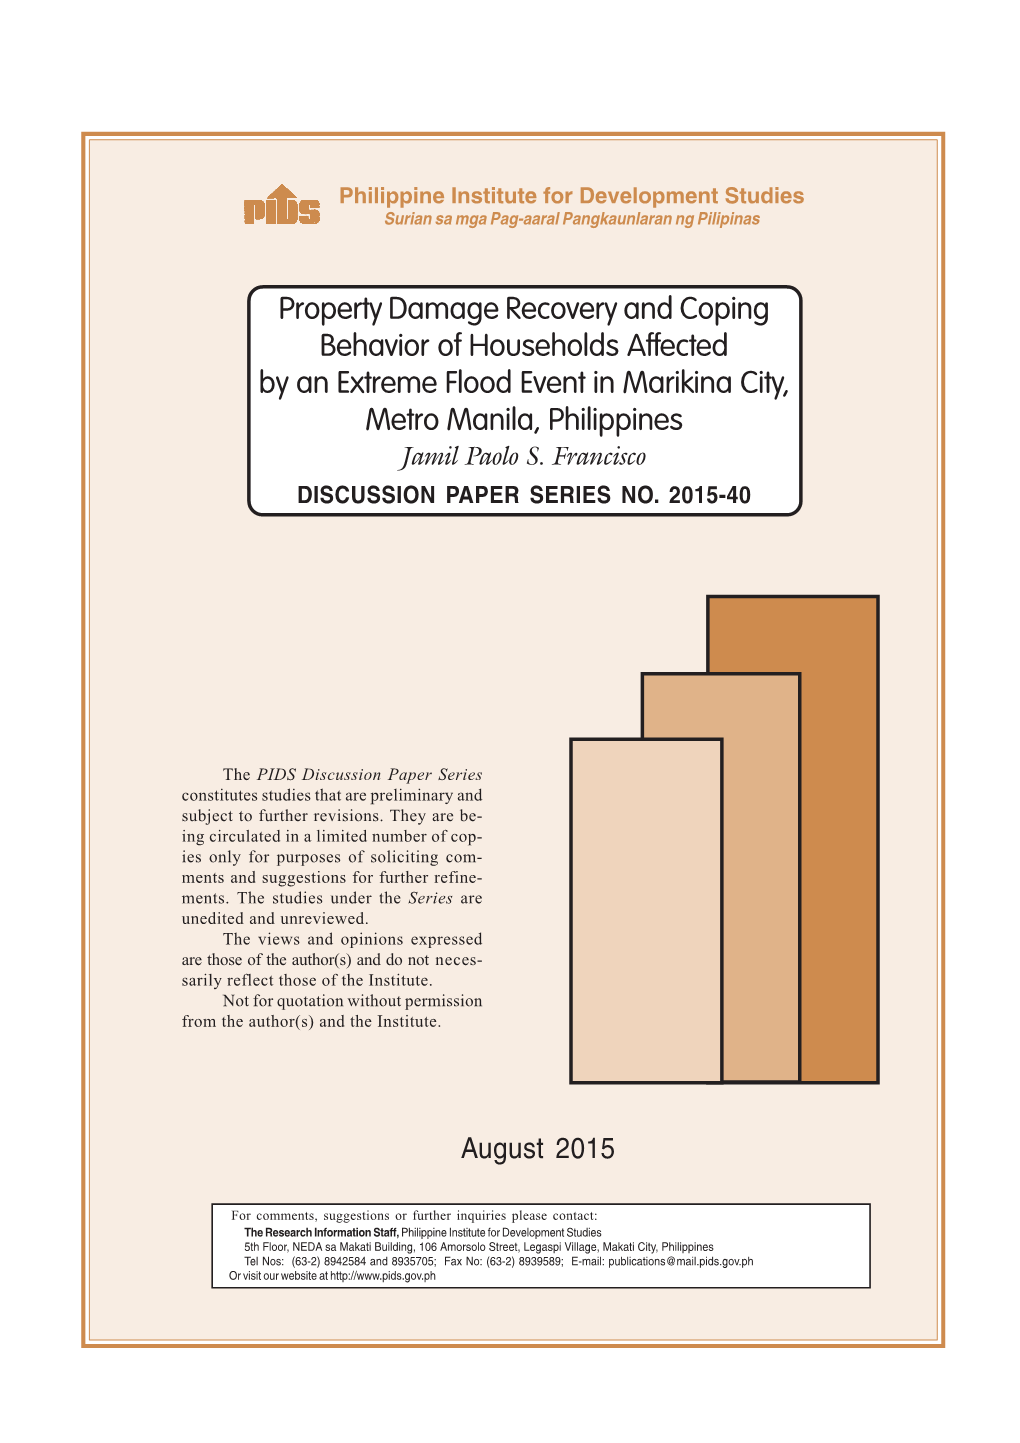 Property Damage Recovery and Coping Behavior of Households Affected by an Extreme Flood Event in Marikina City, Metro Manila, Philippines Jamil Paolo S